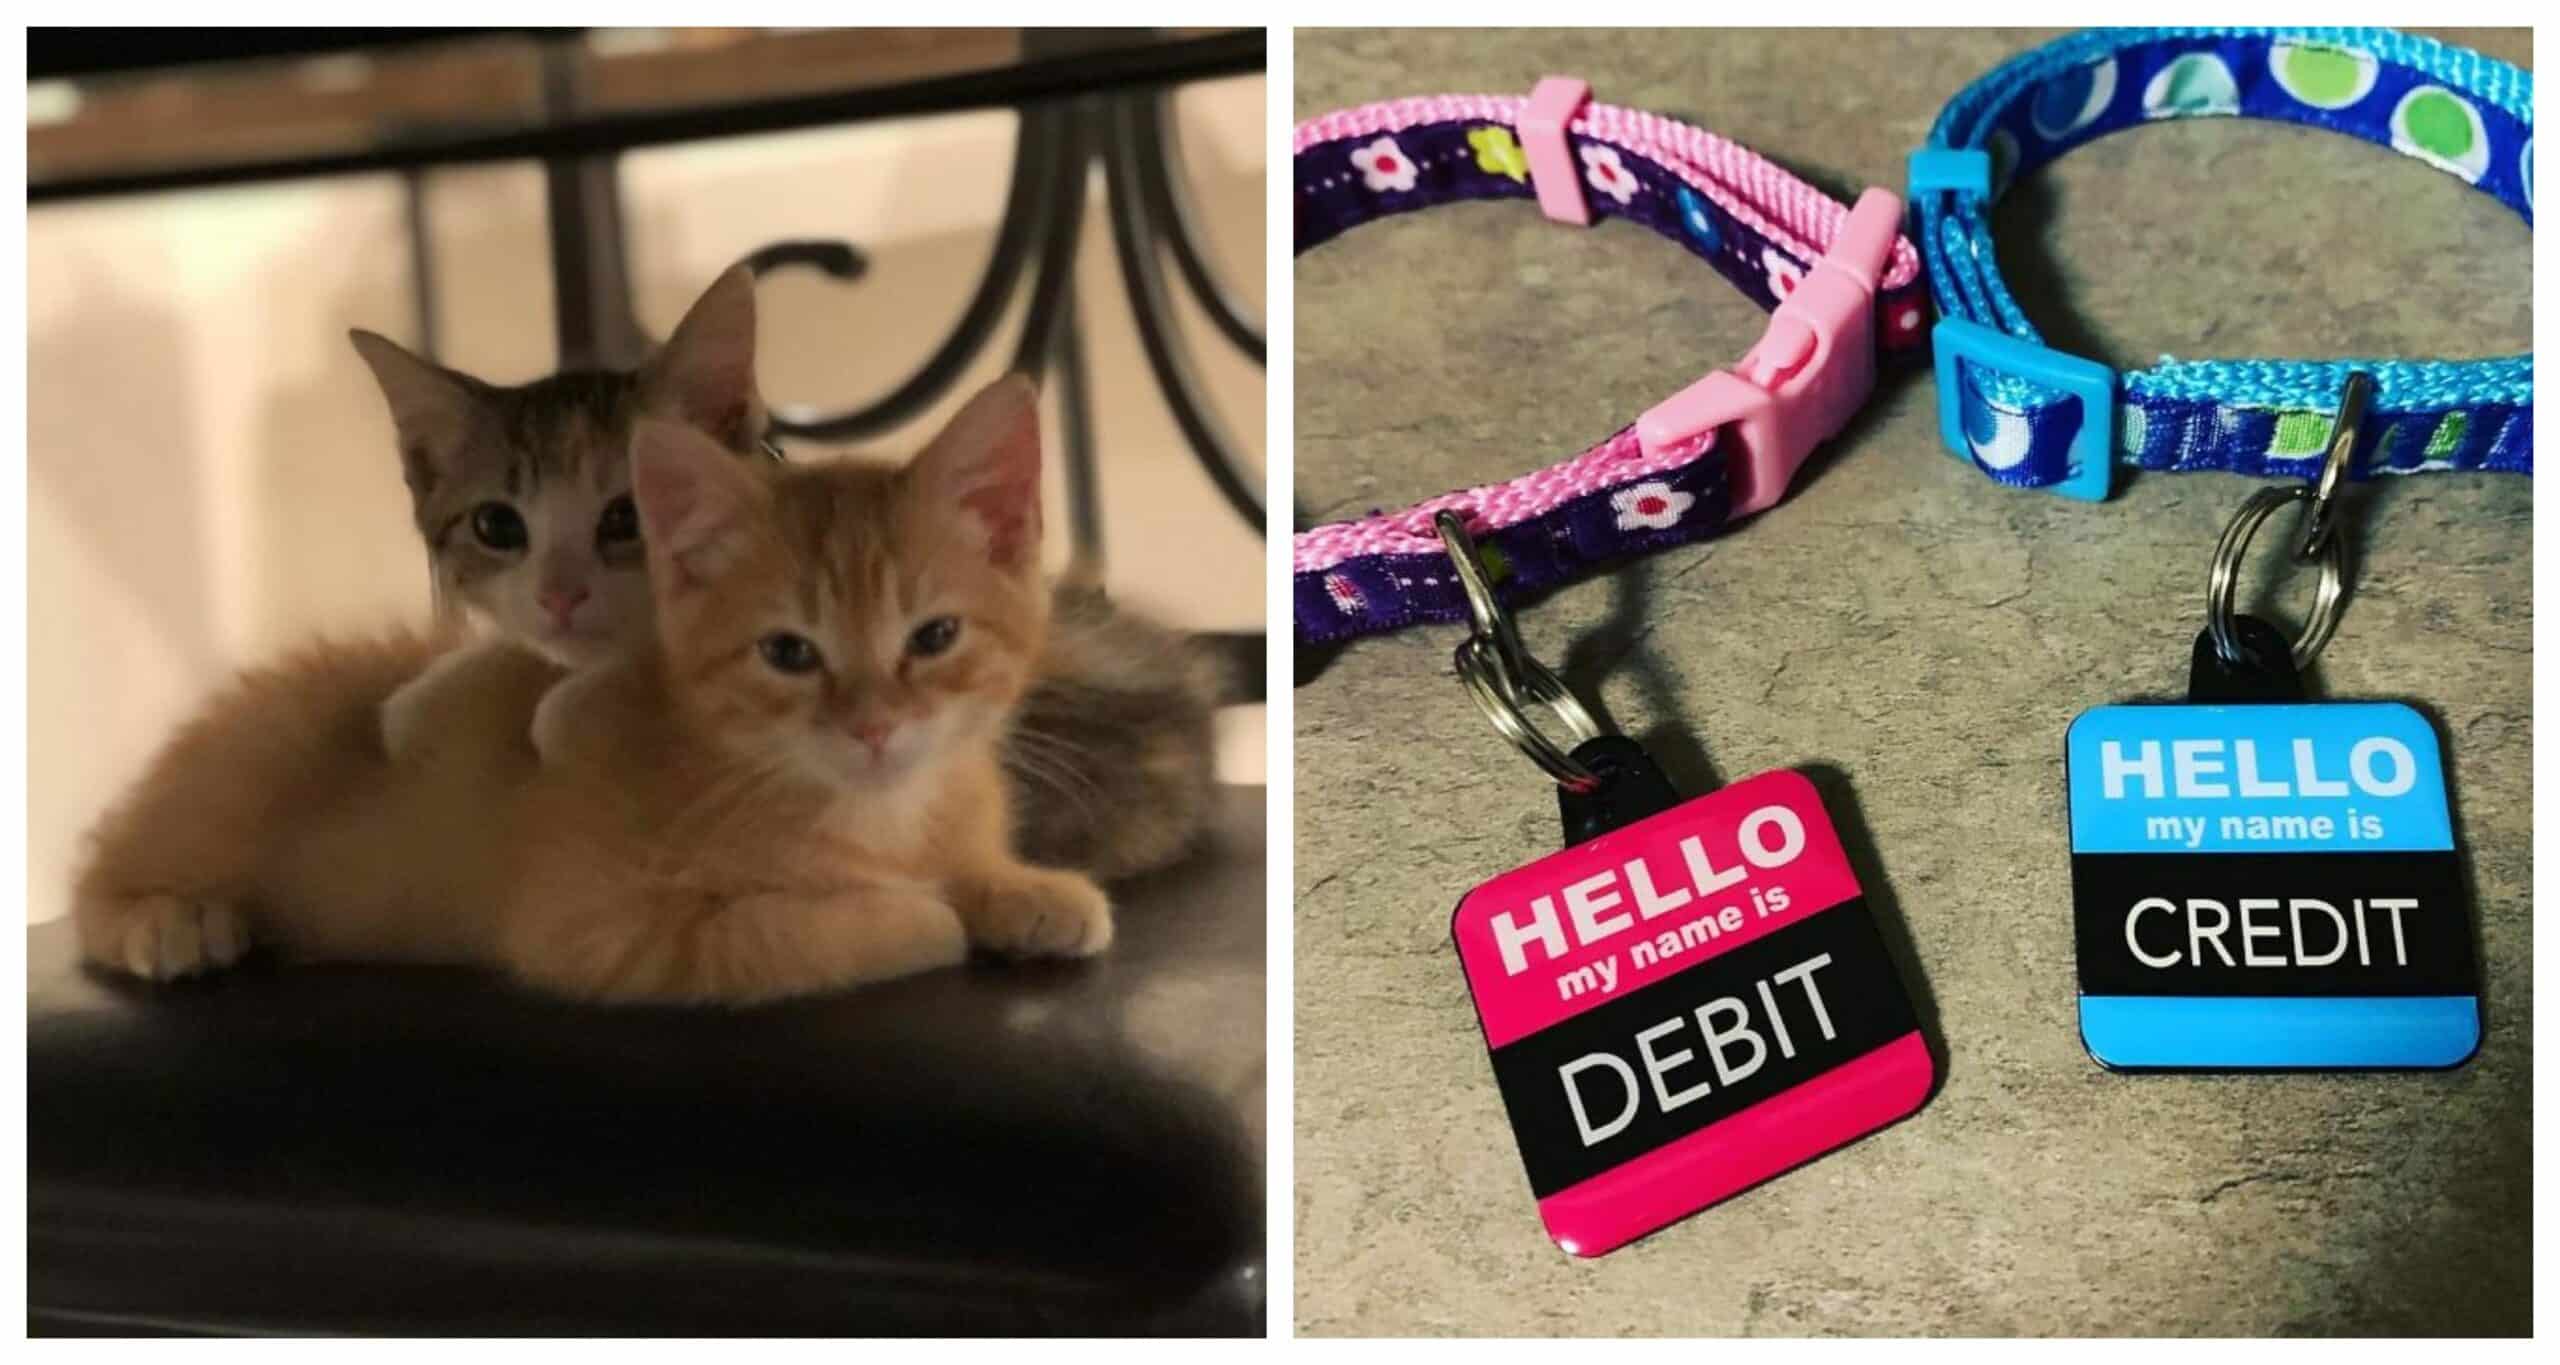 To boost employee morale the company adopts two office kittens (debit and credit)